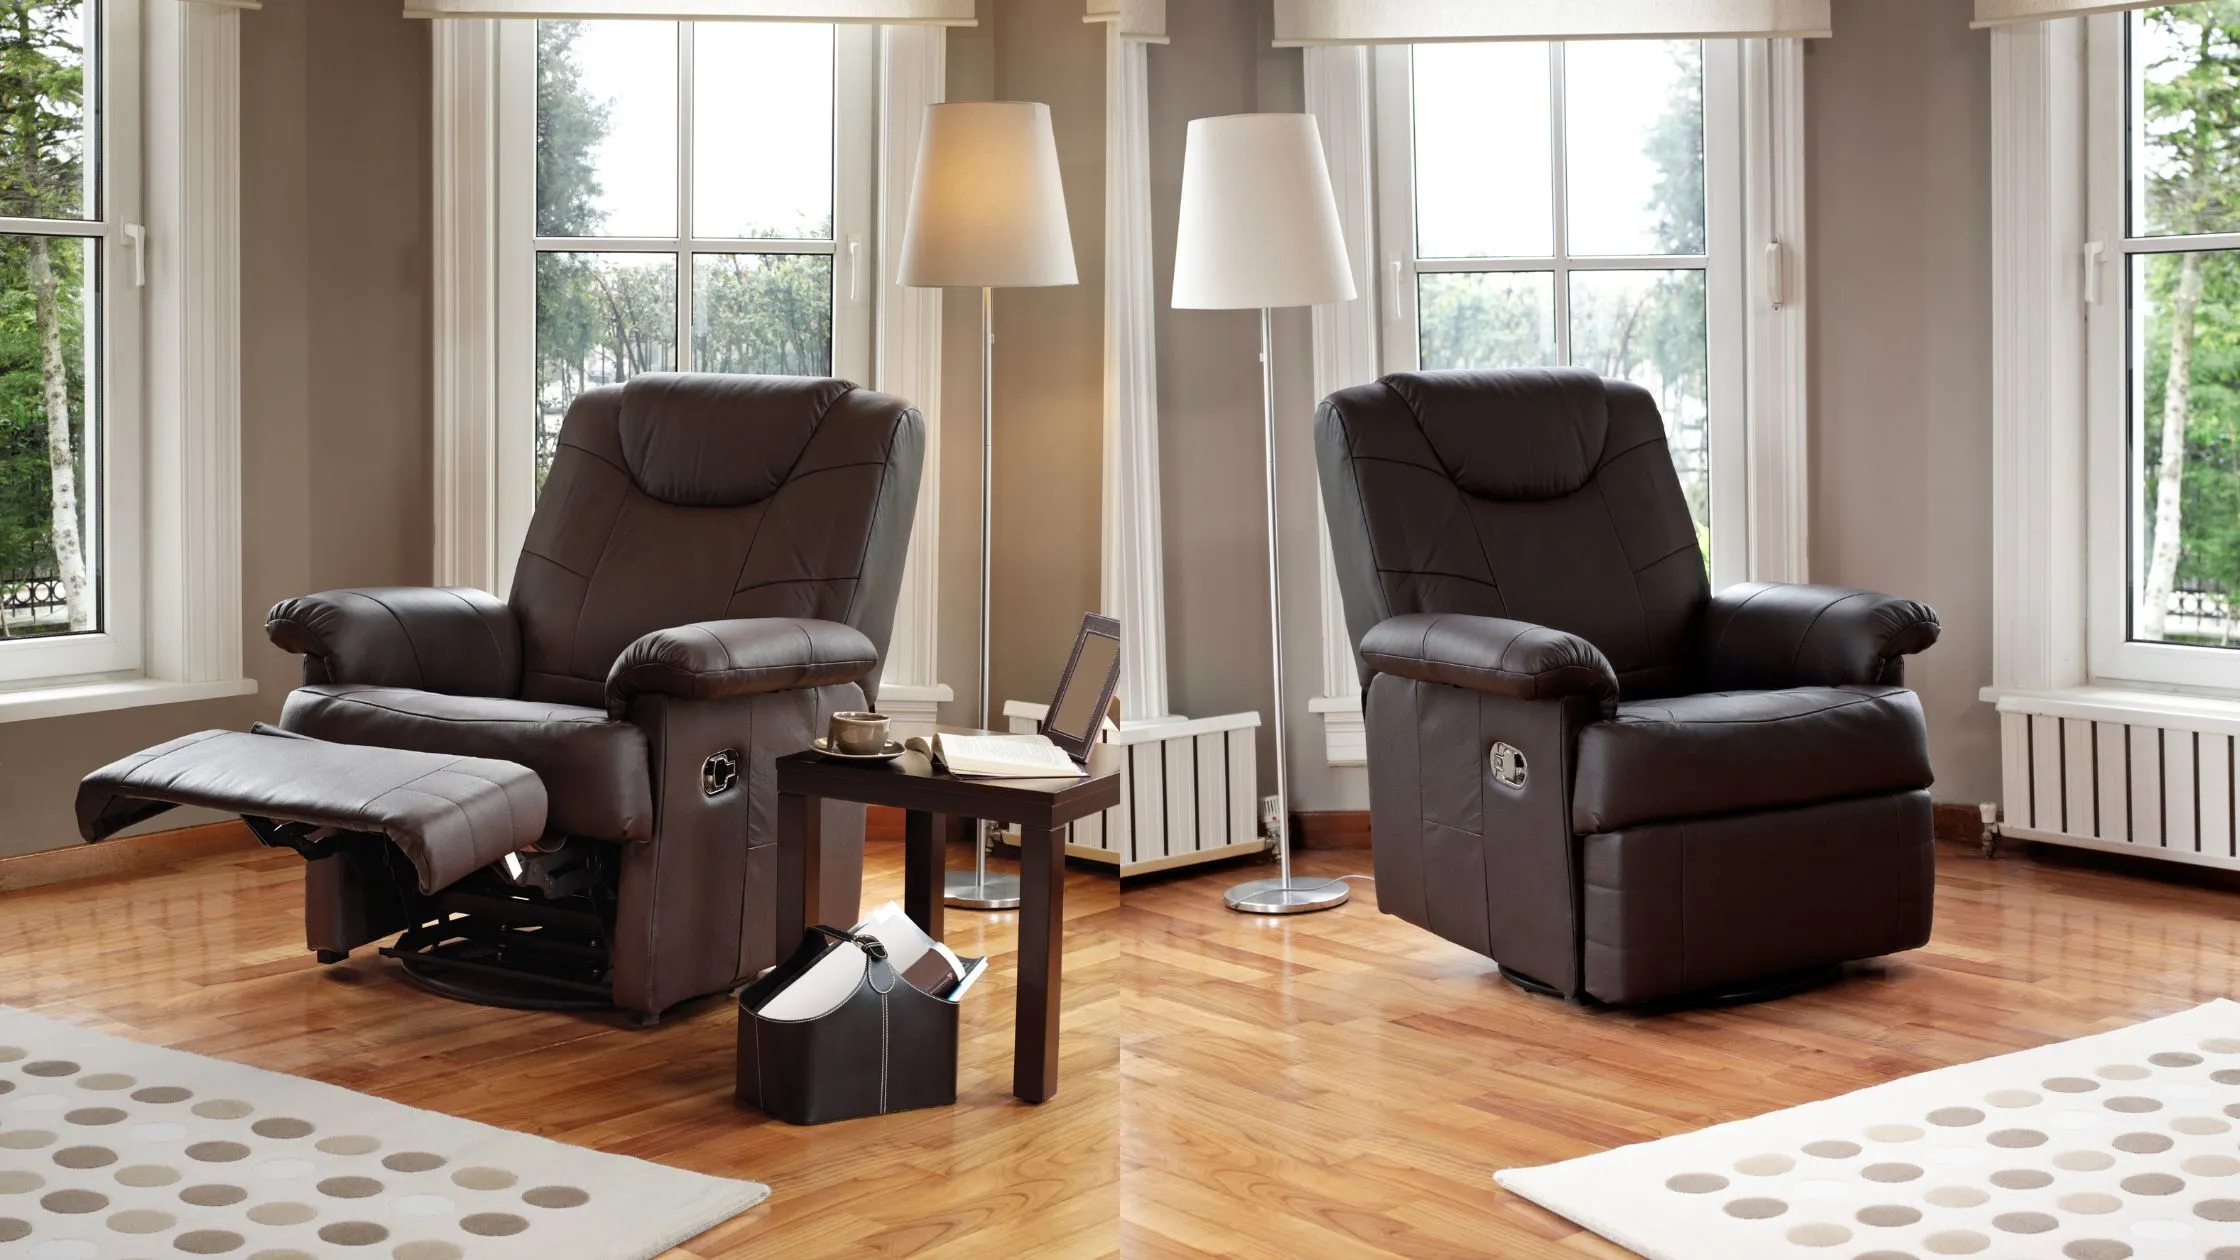 Best Black Friday Deals On Recliners 2022​